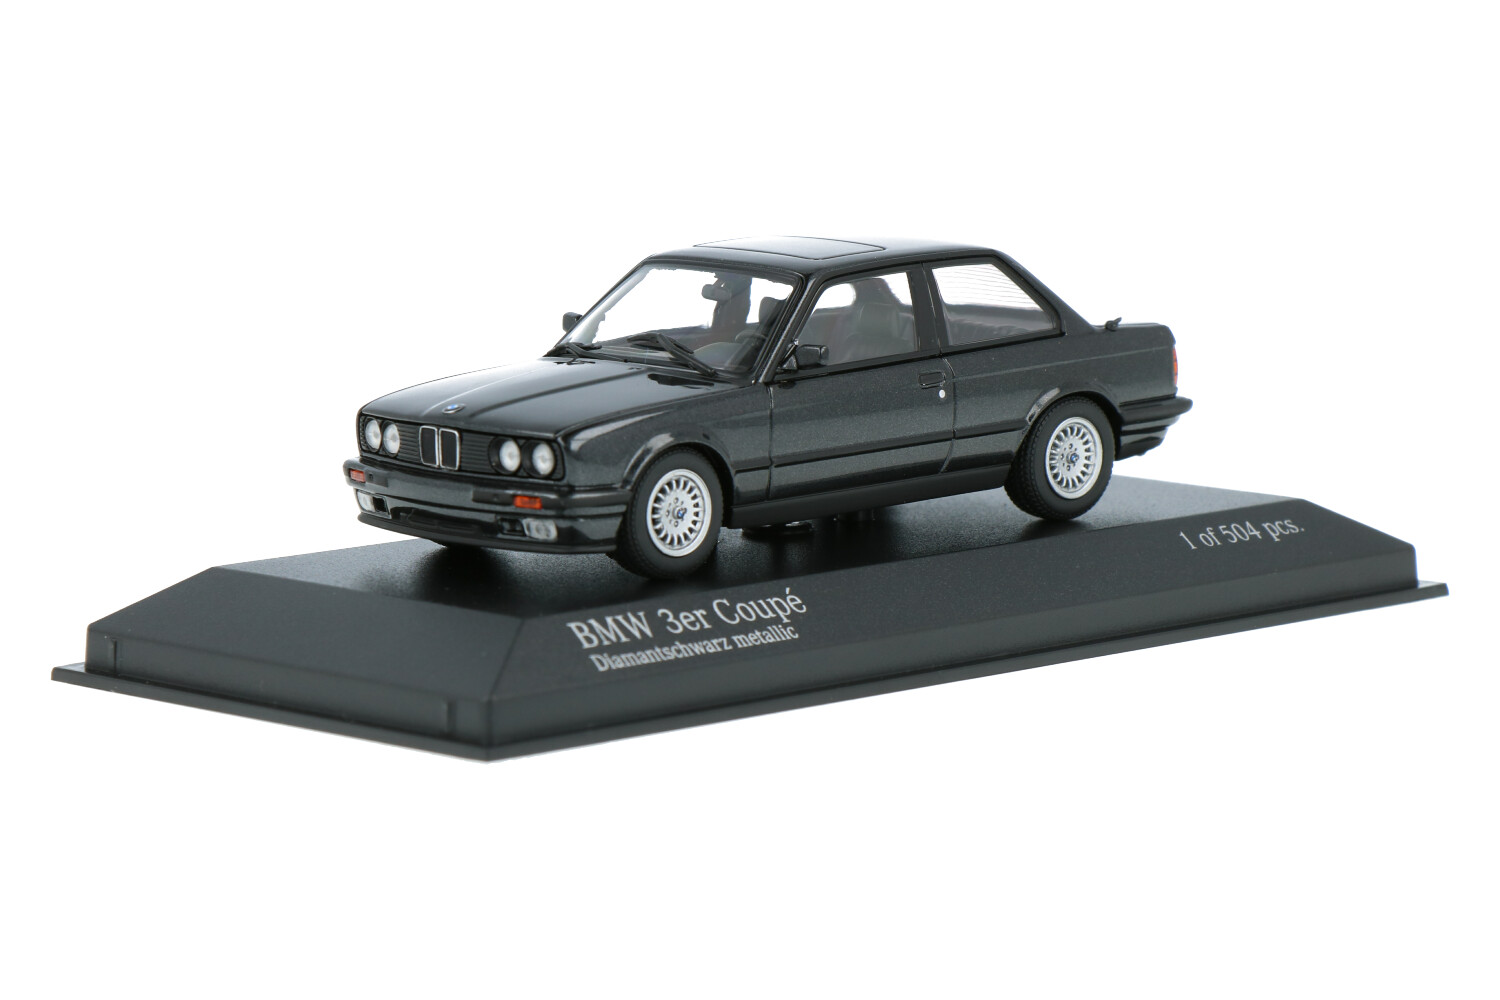 BMW-3-Series-Coupe-431024002_13154012138097872BMW-3-Series-Coupe-431024002_Houseofmodelcars_.jpg